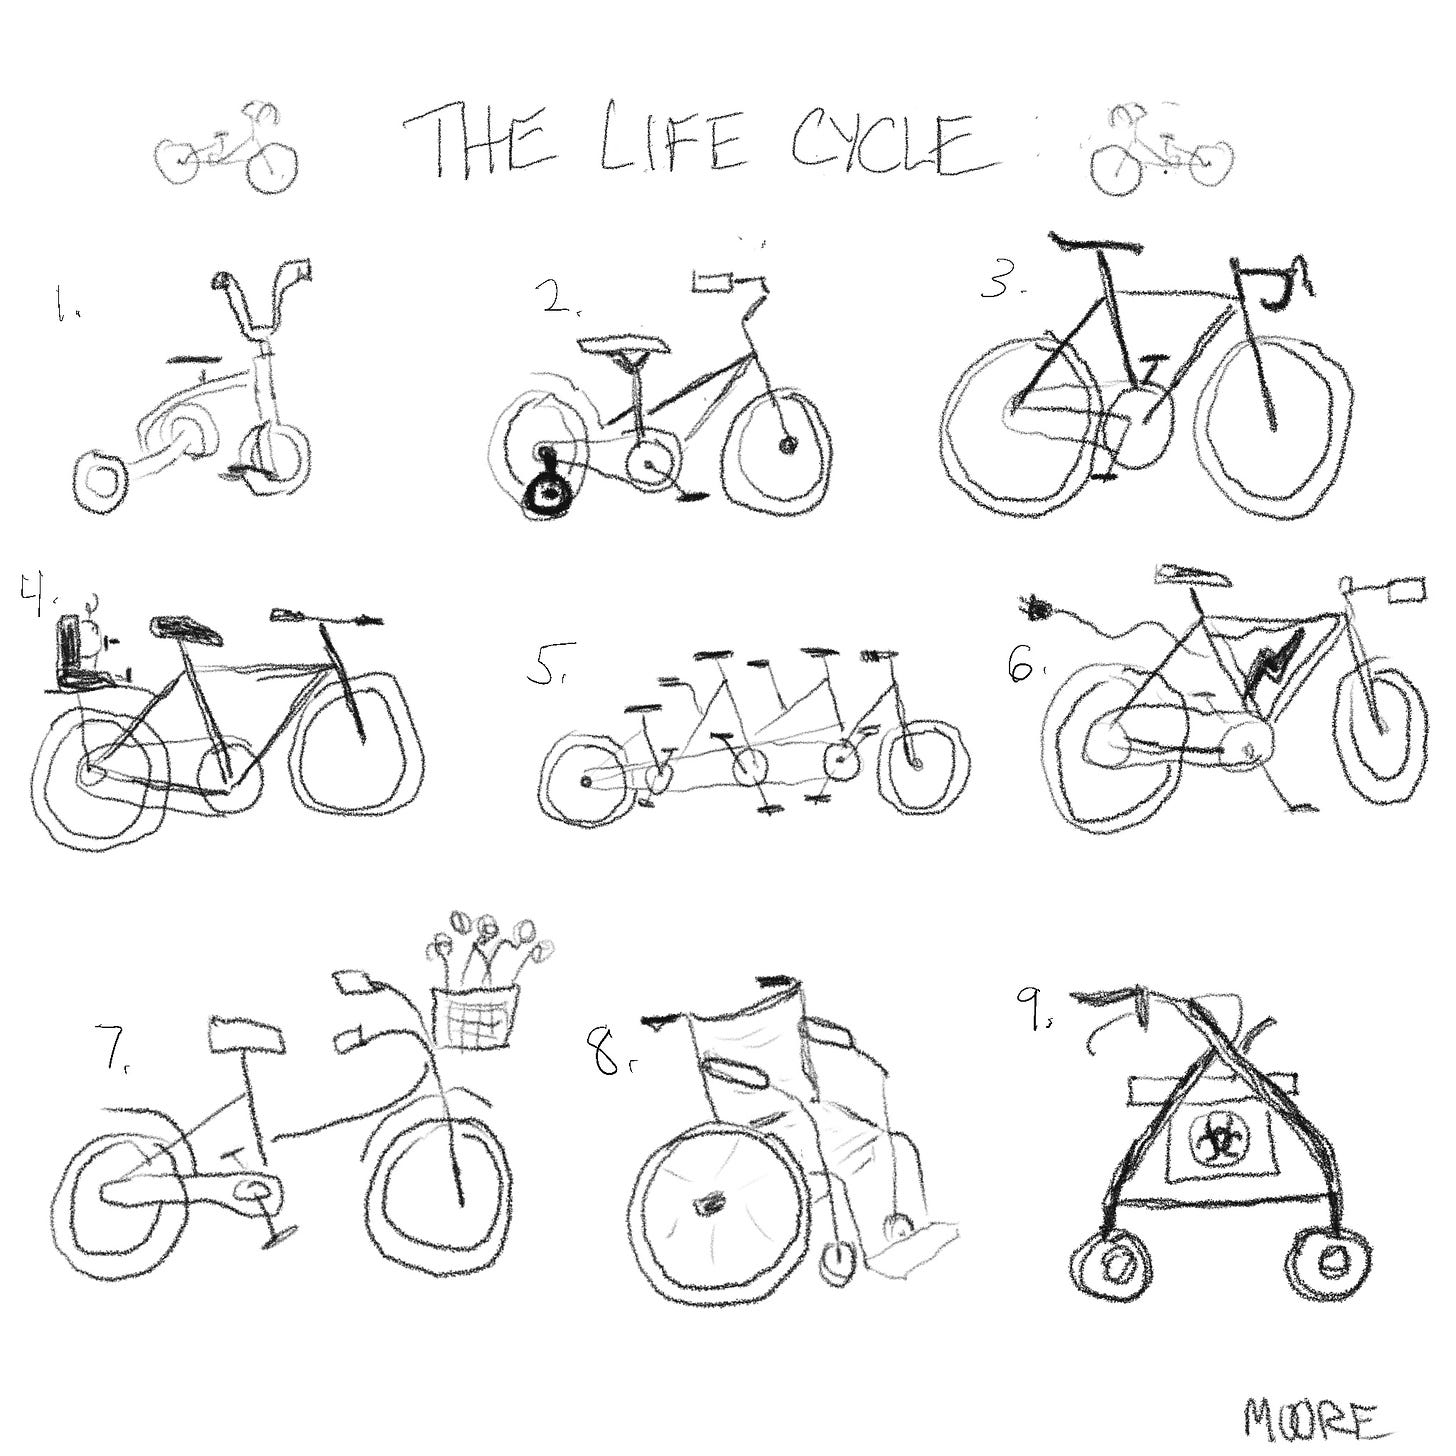 bicycles representing life stages